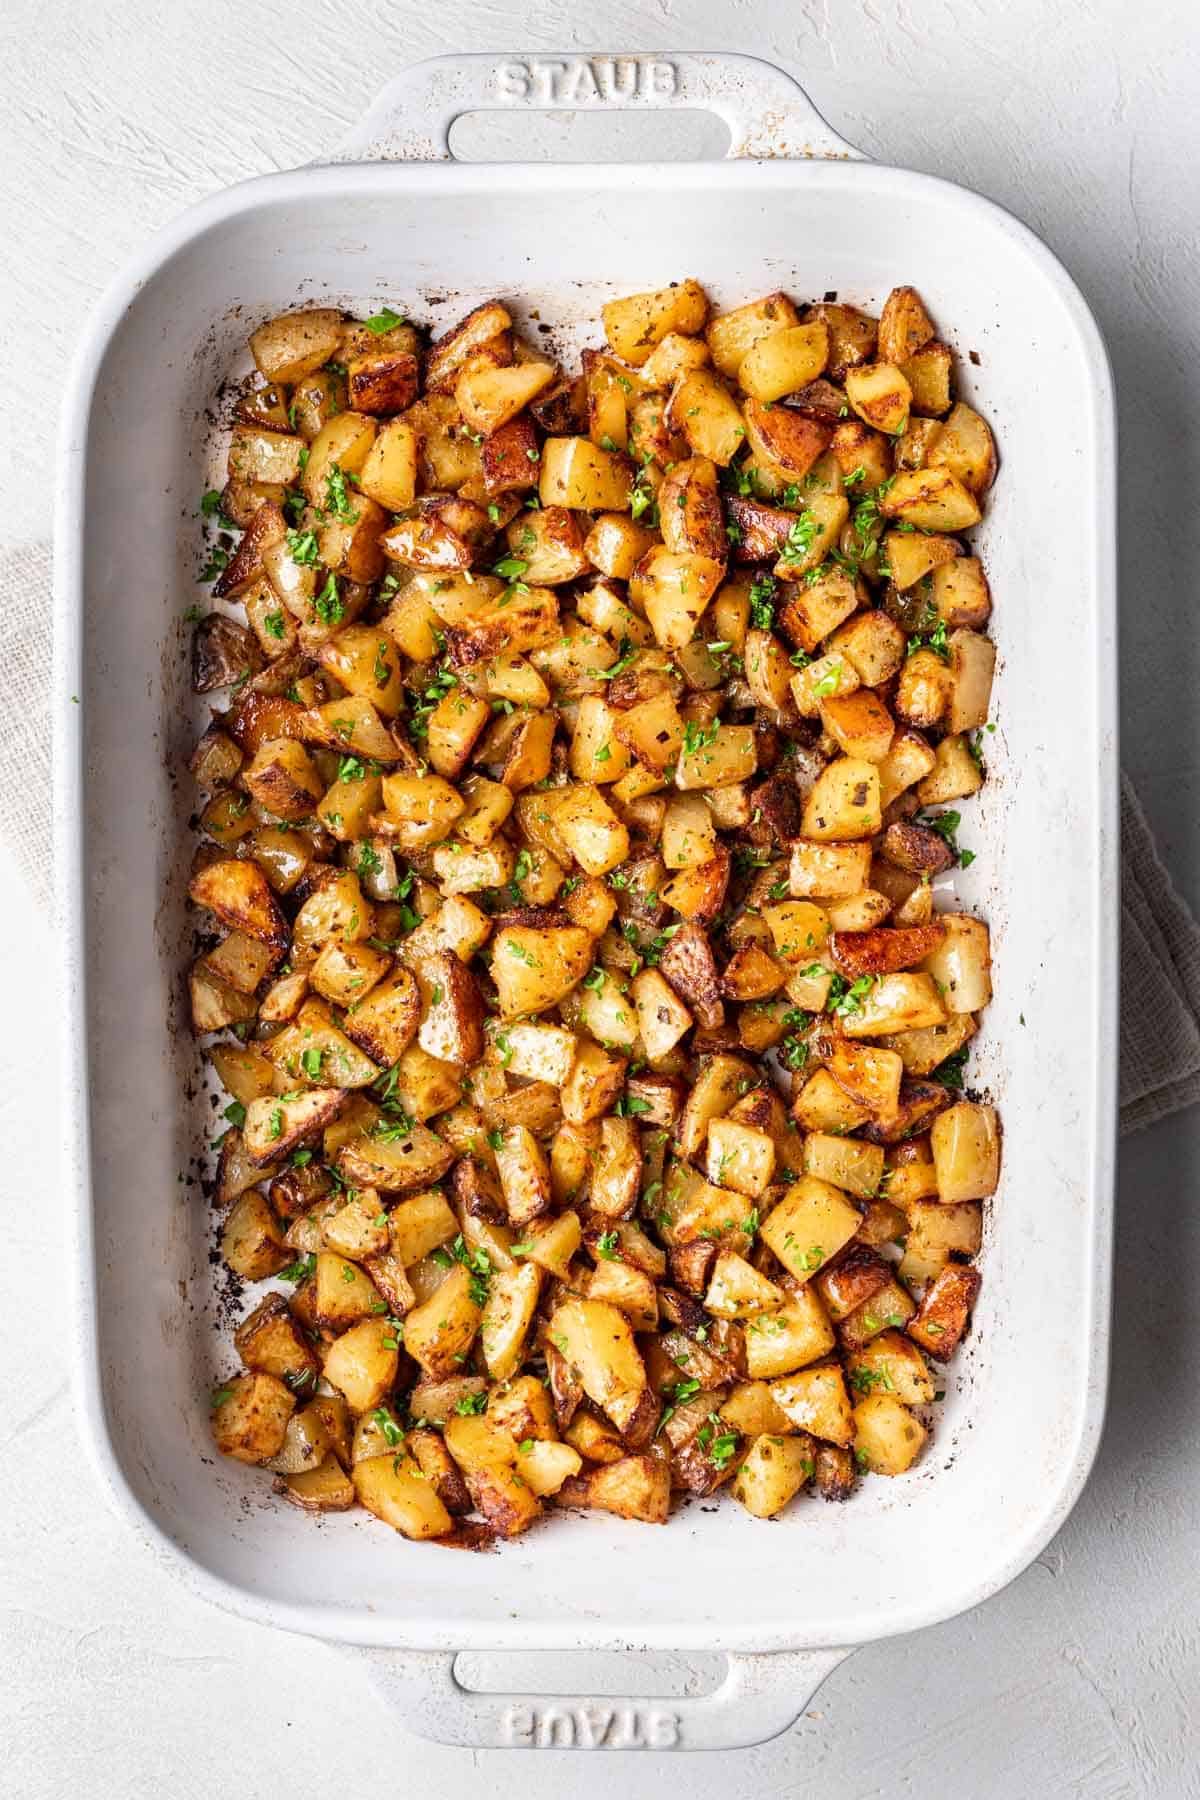 Cooked potatoes in baking dish.